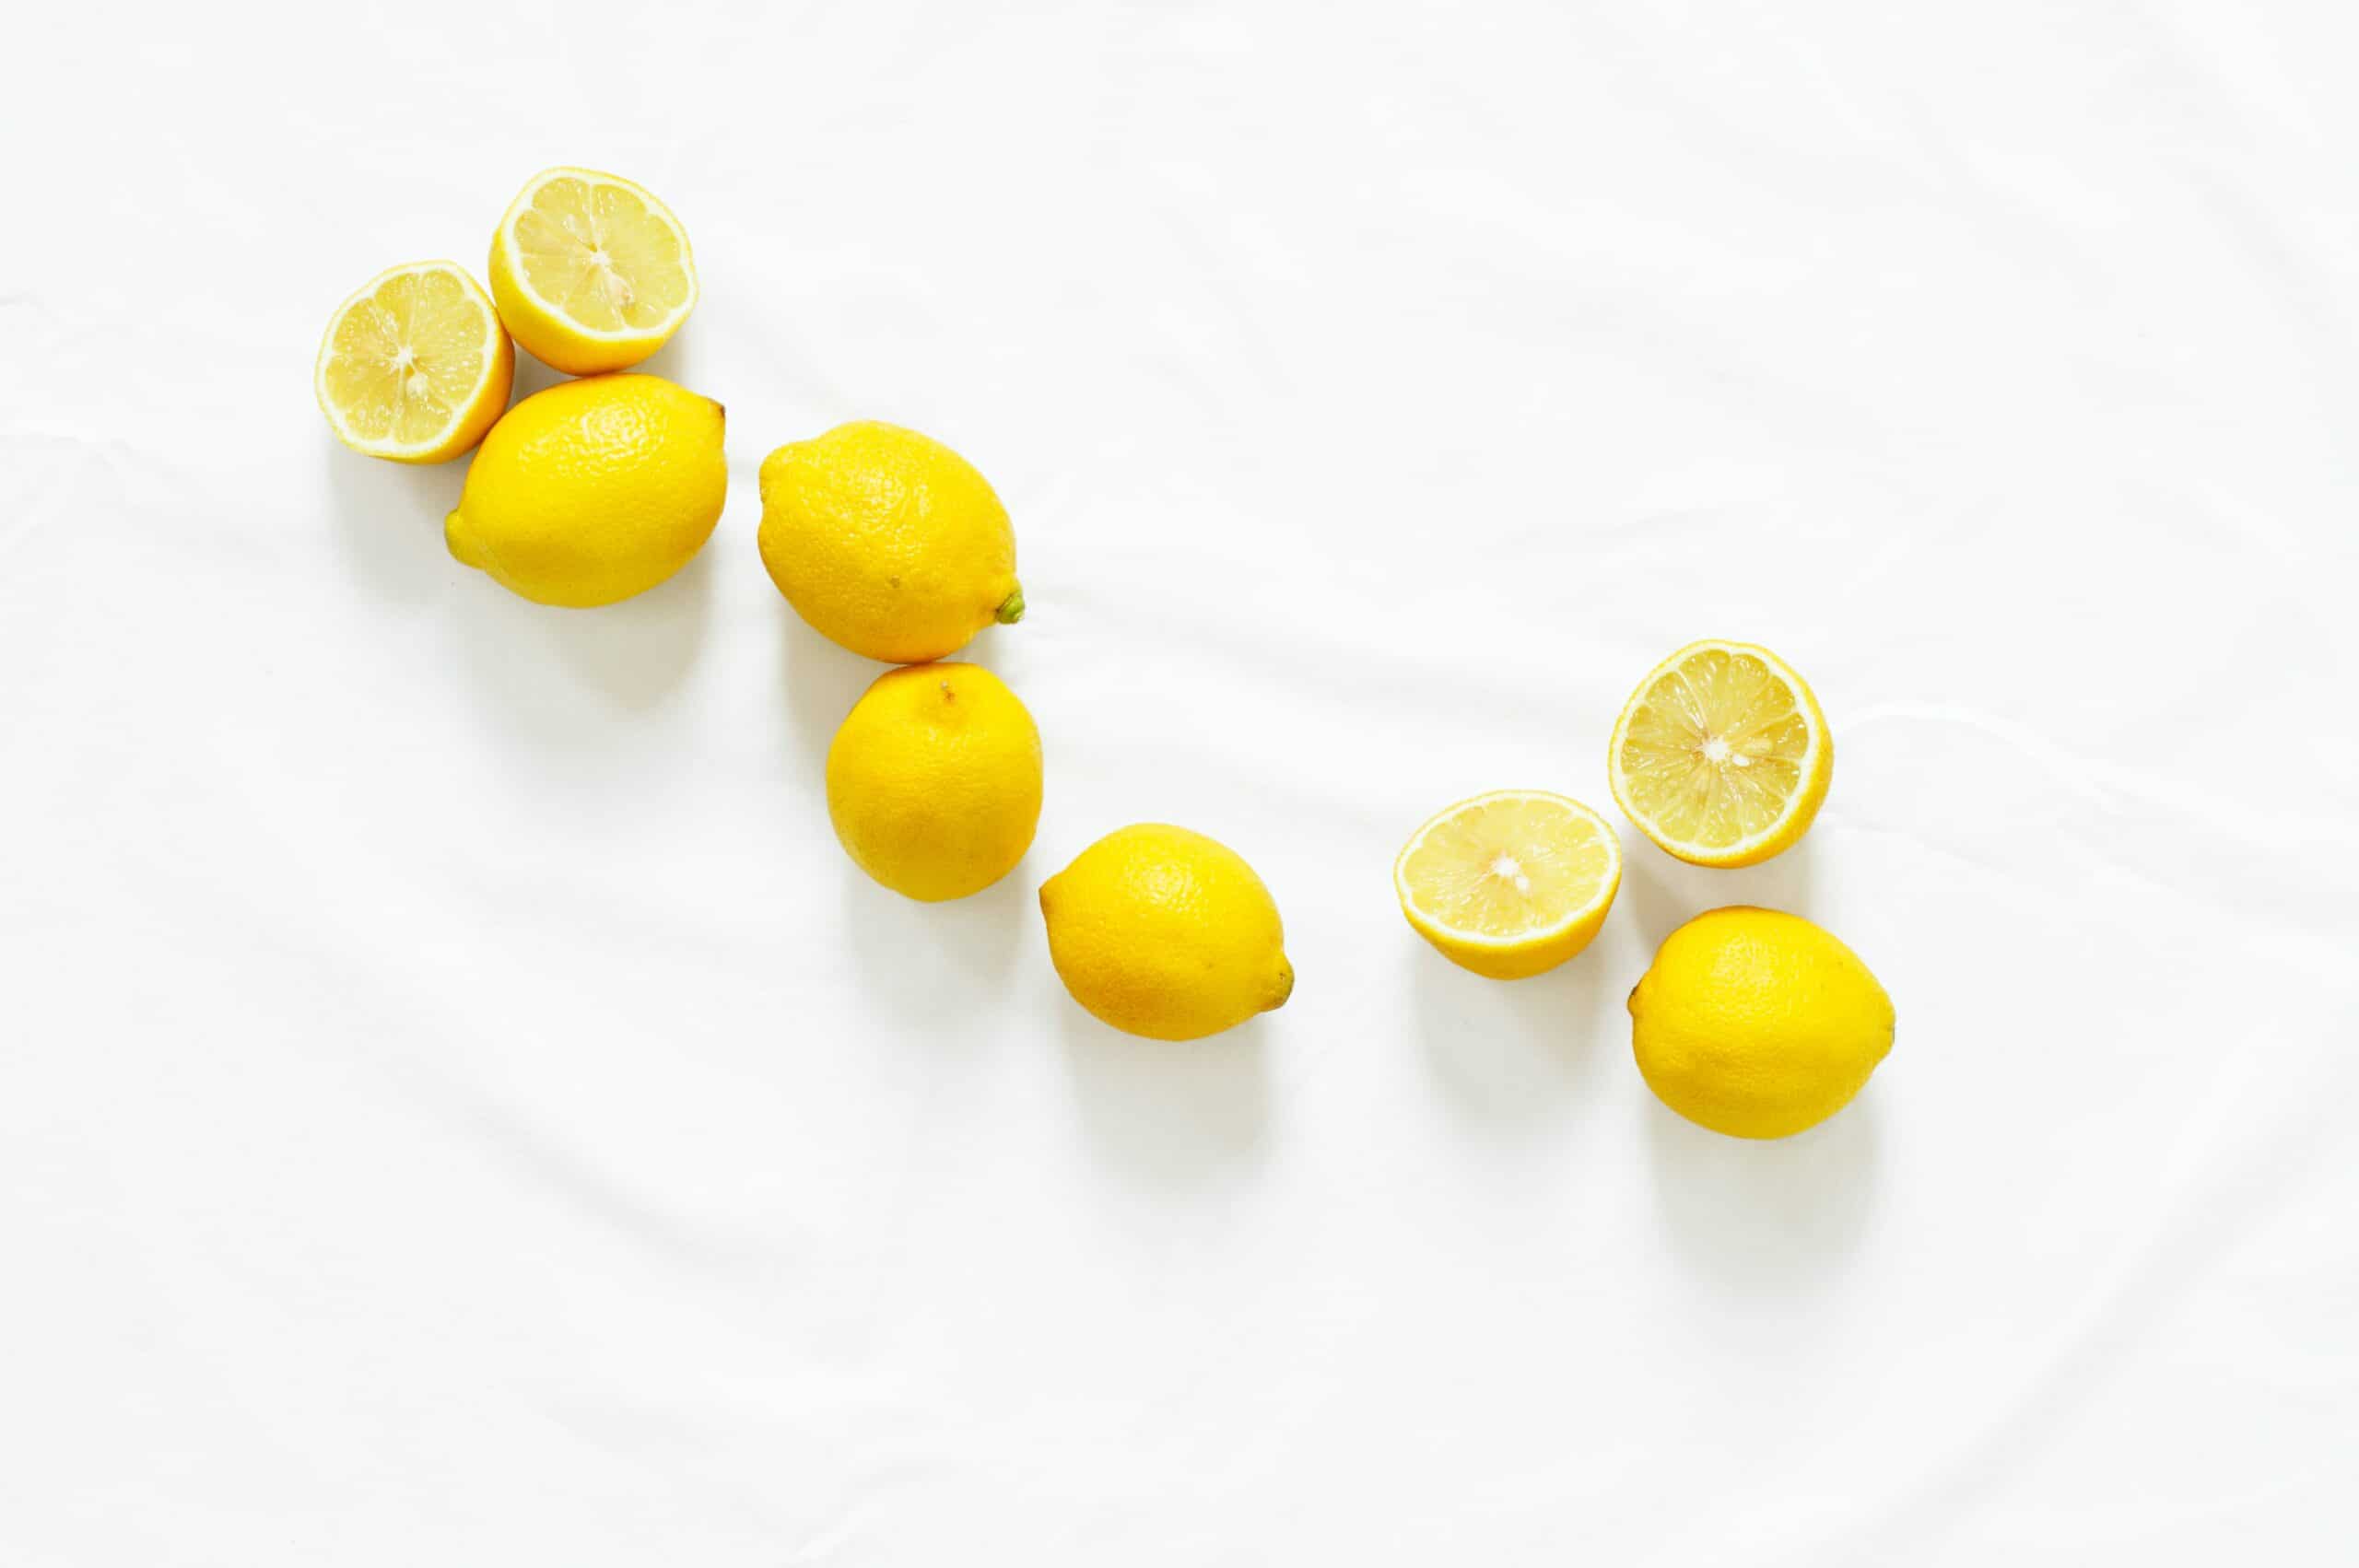 Collection of whole and sliced lemons.